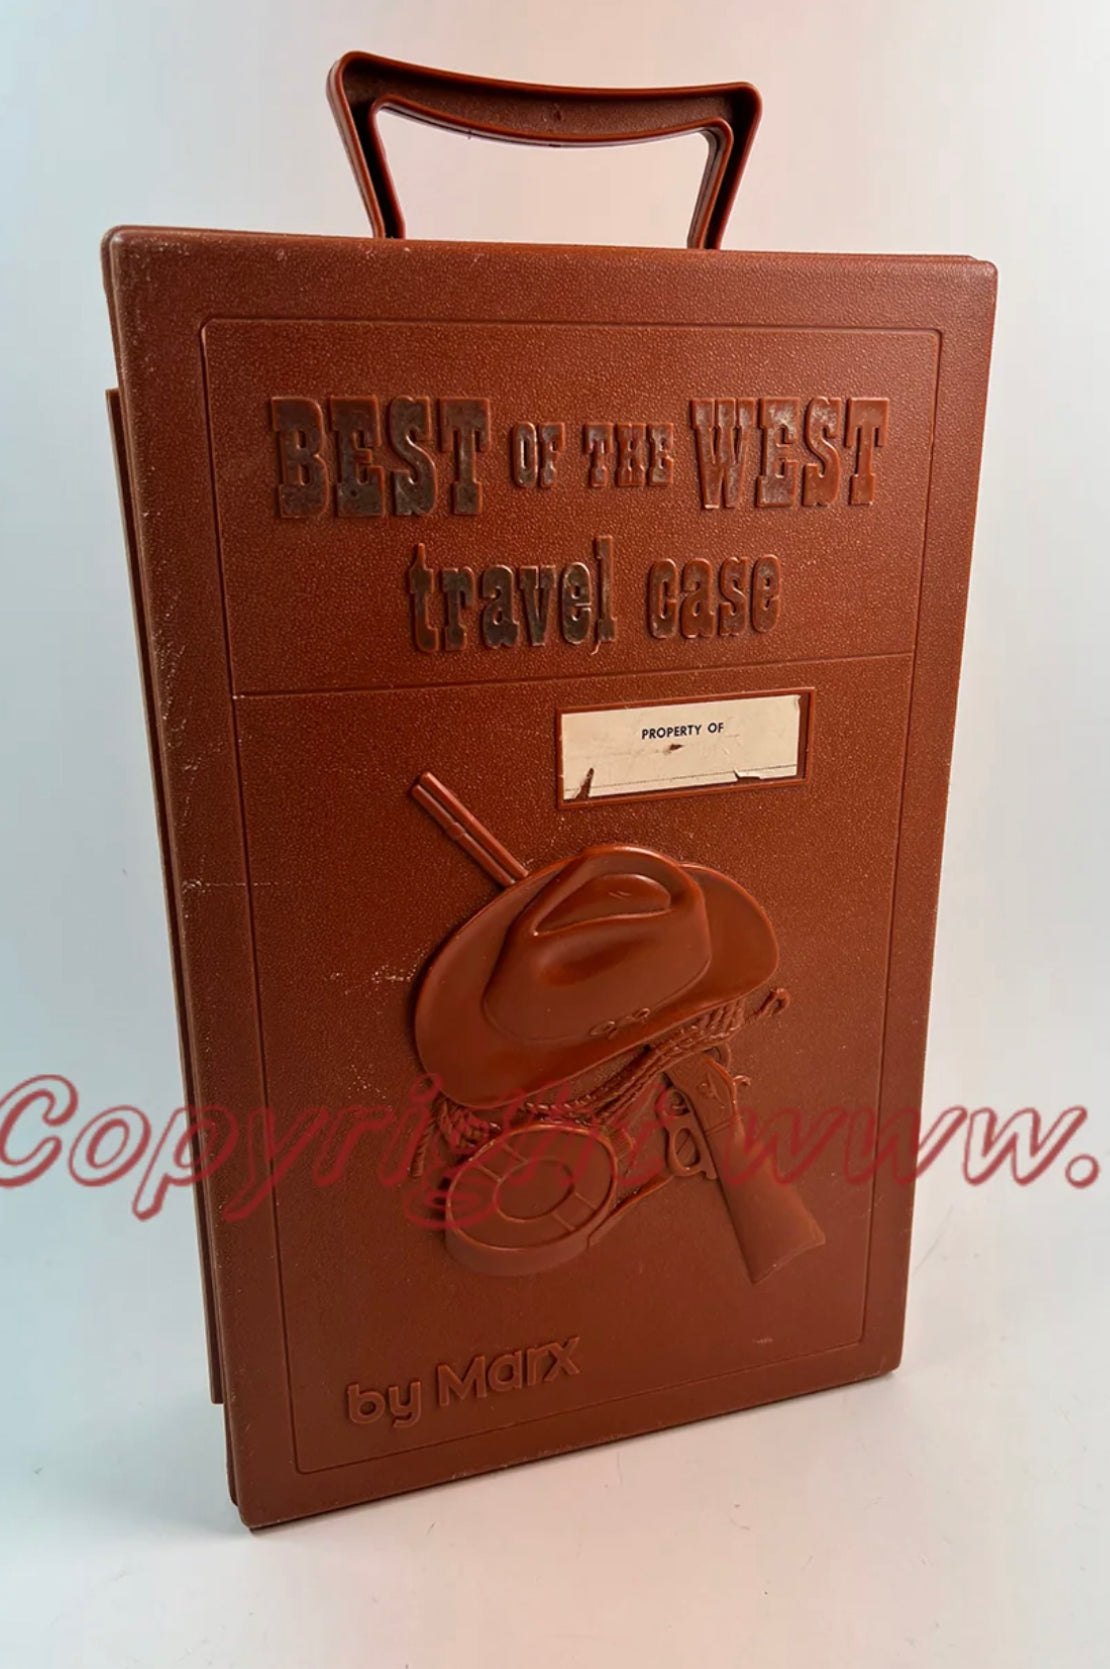 Best of The West Travel Case